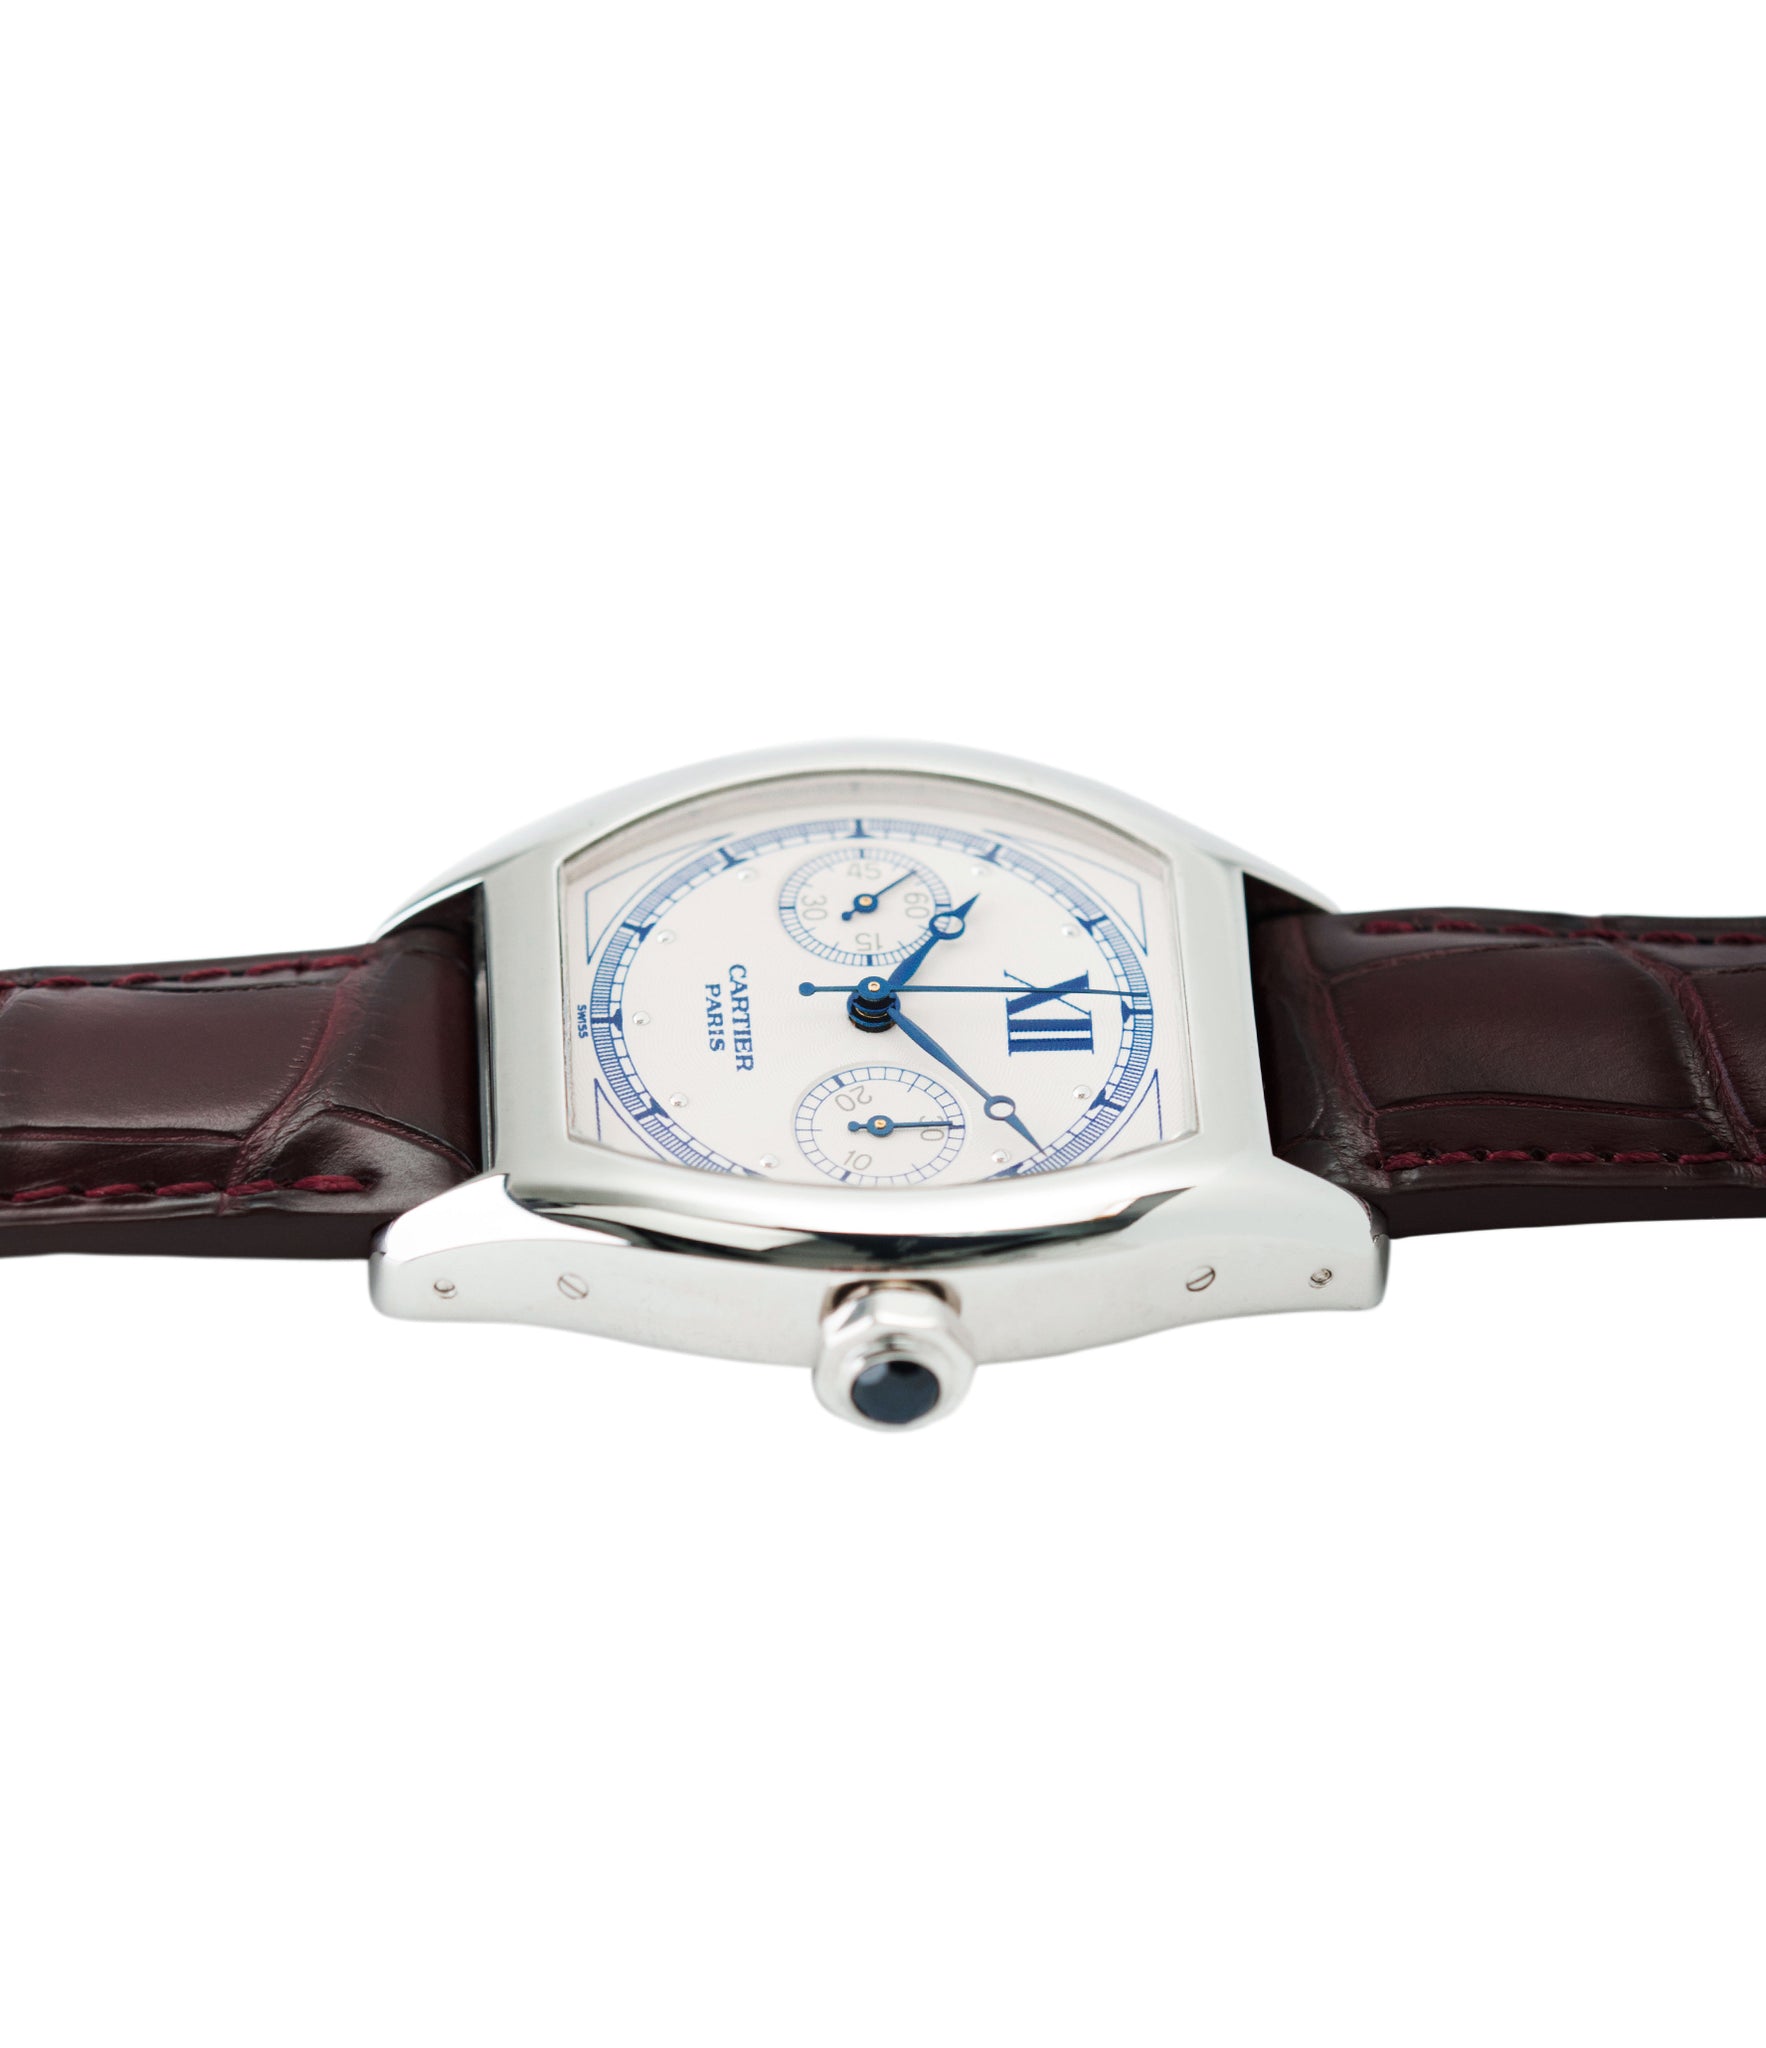 preowned Cartier Monopusher Monopoussoir ref. 2396 white gold dress watch with THA ebauche for sale online at A Collected Man London UK specialist of rare watches